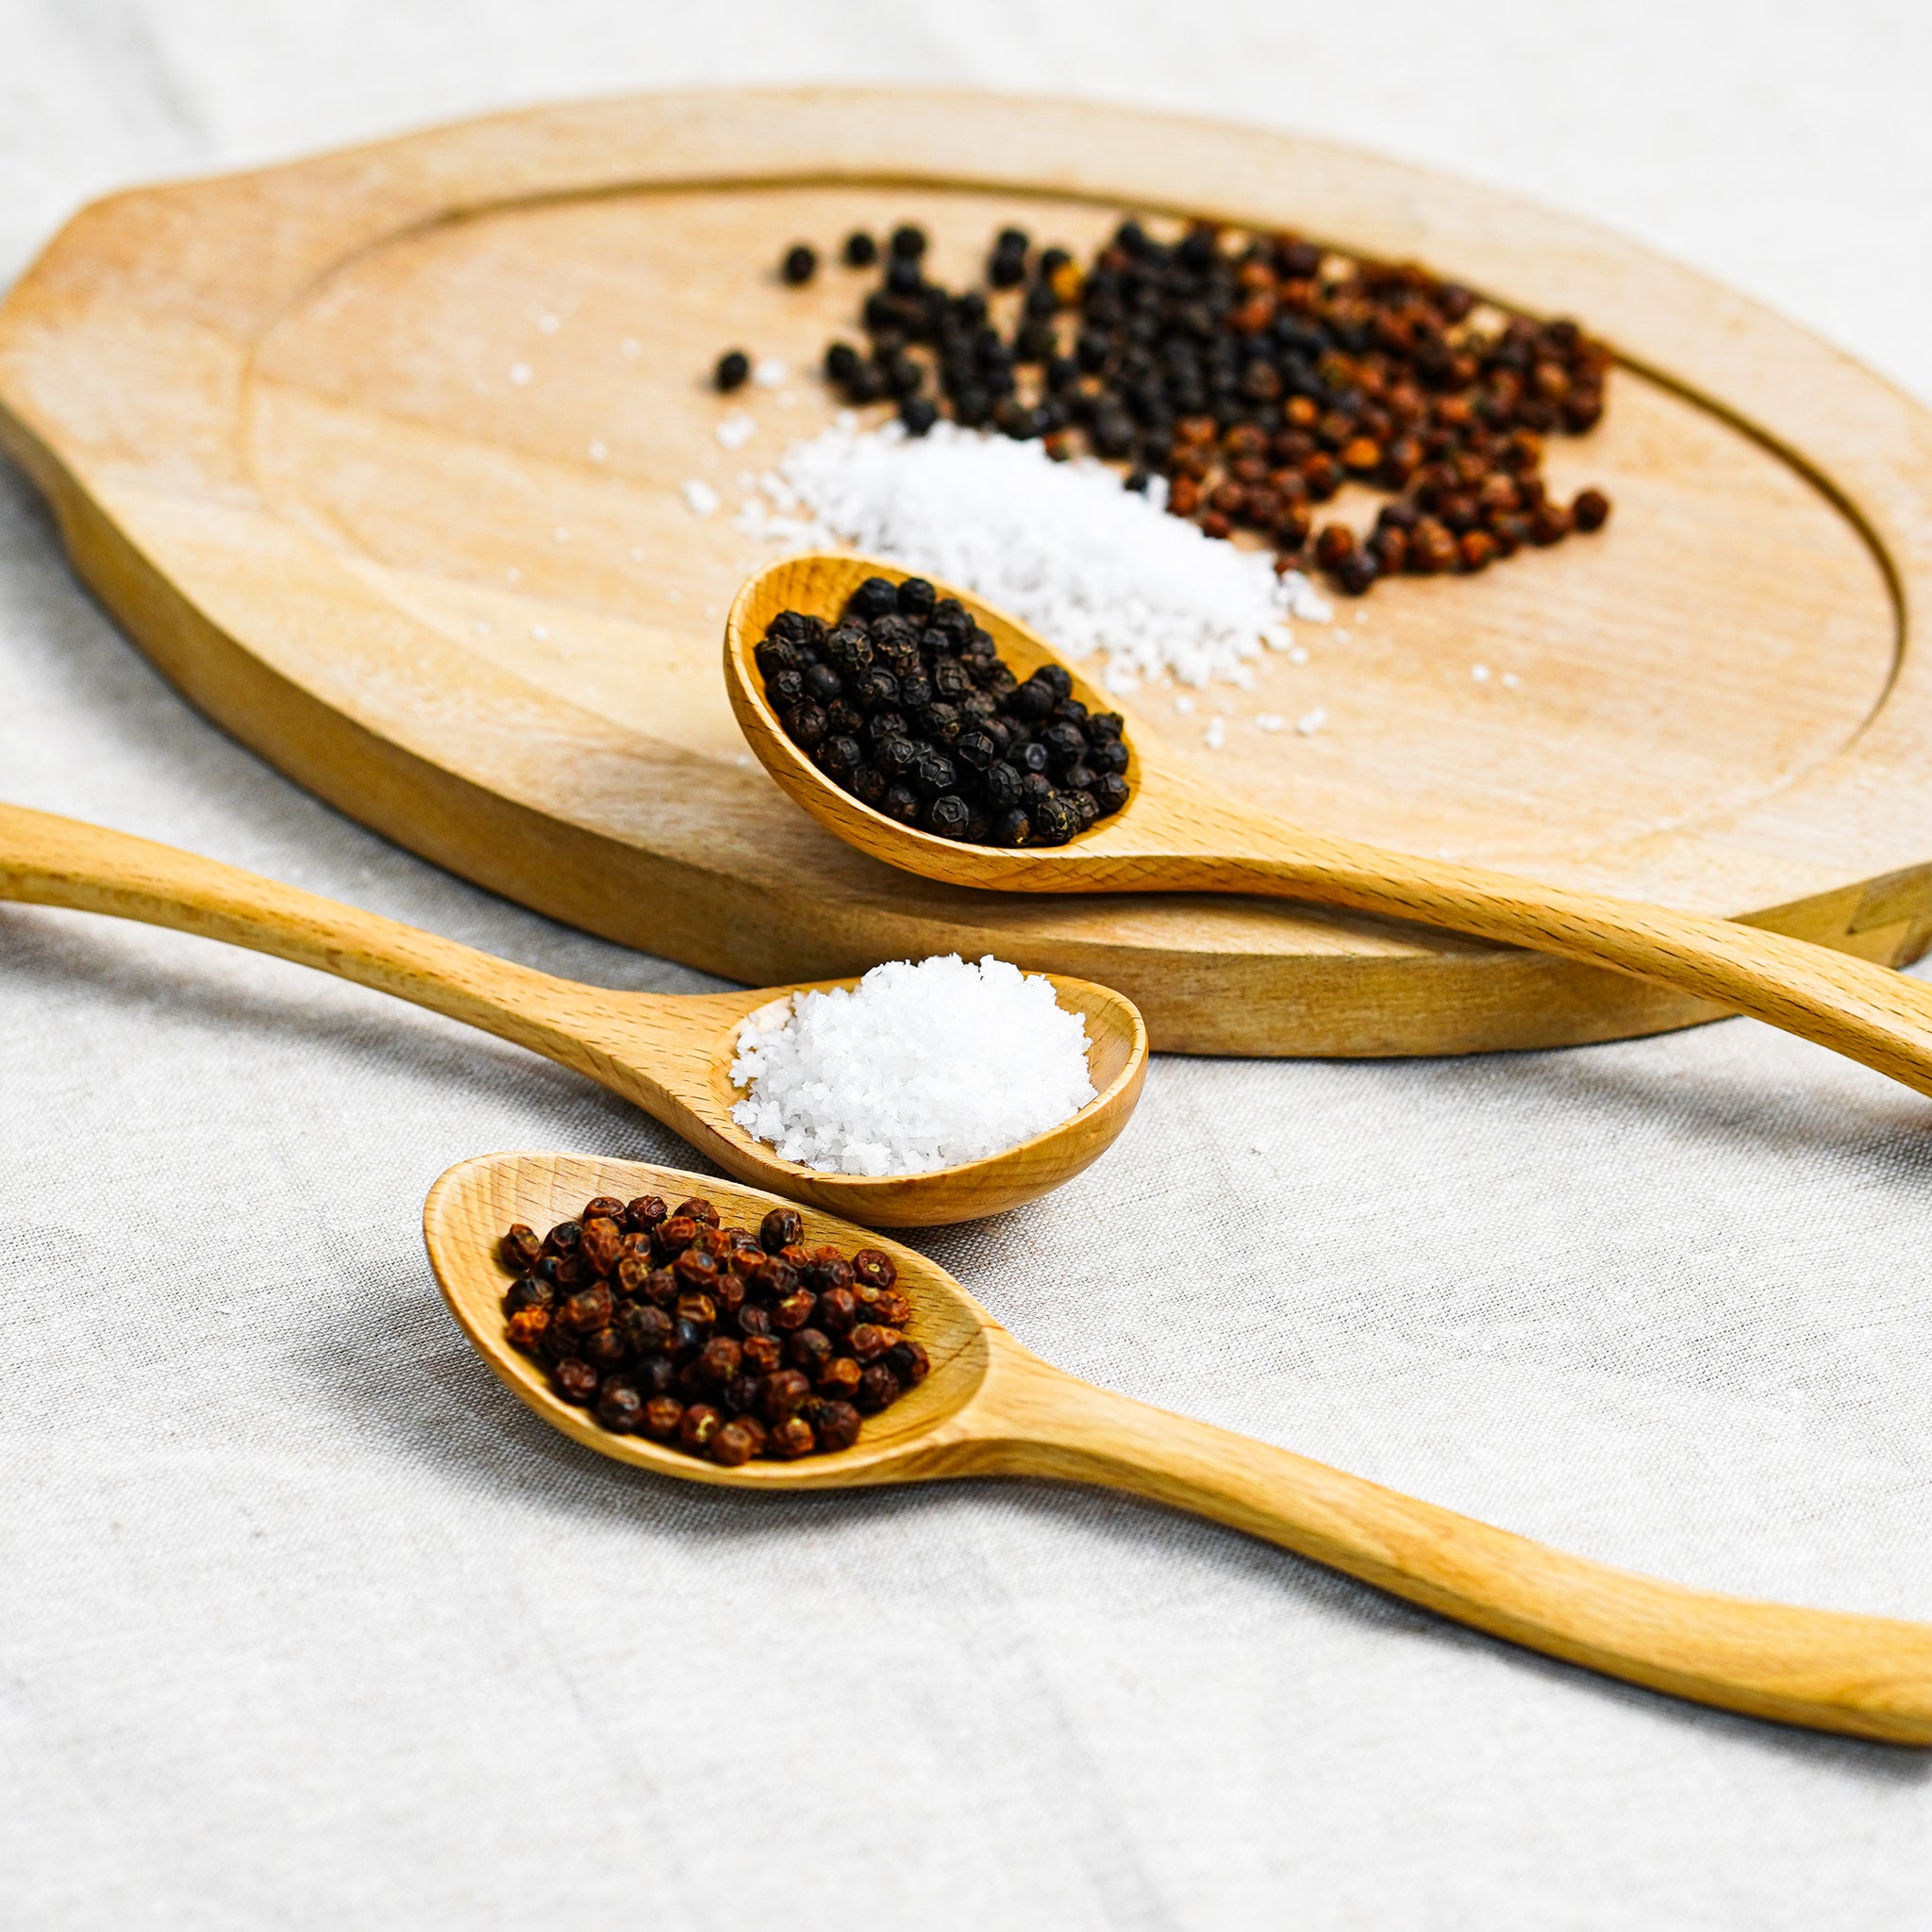 These peppercorns are small drops of peppery heat that explode in your mouth and spice up your food magically. Locally harvested Fleur de sel carries a natural seawater taste that enhances your food to another level.